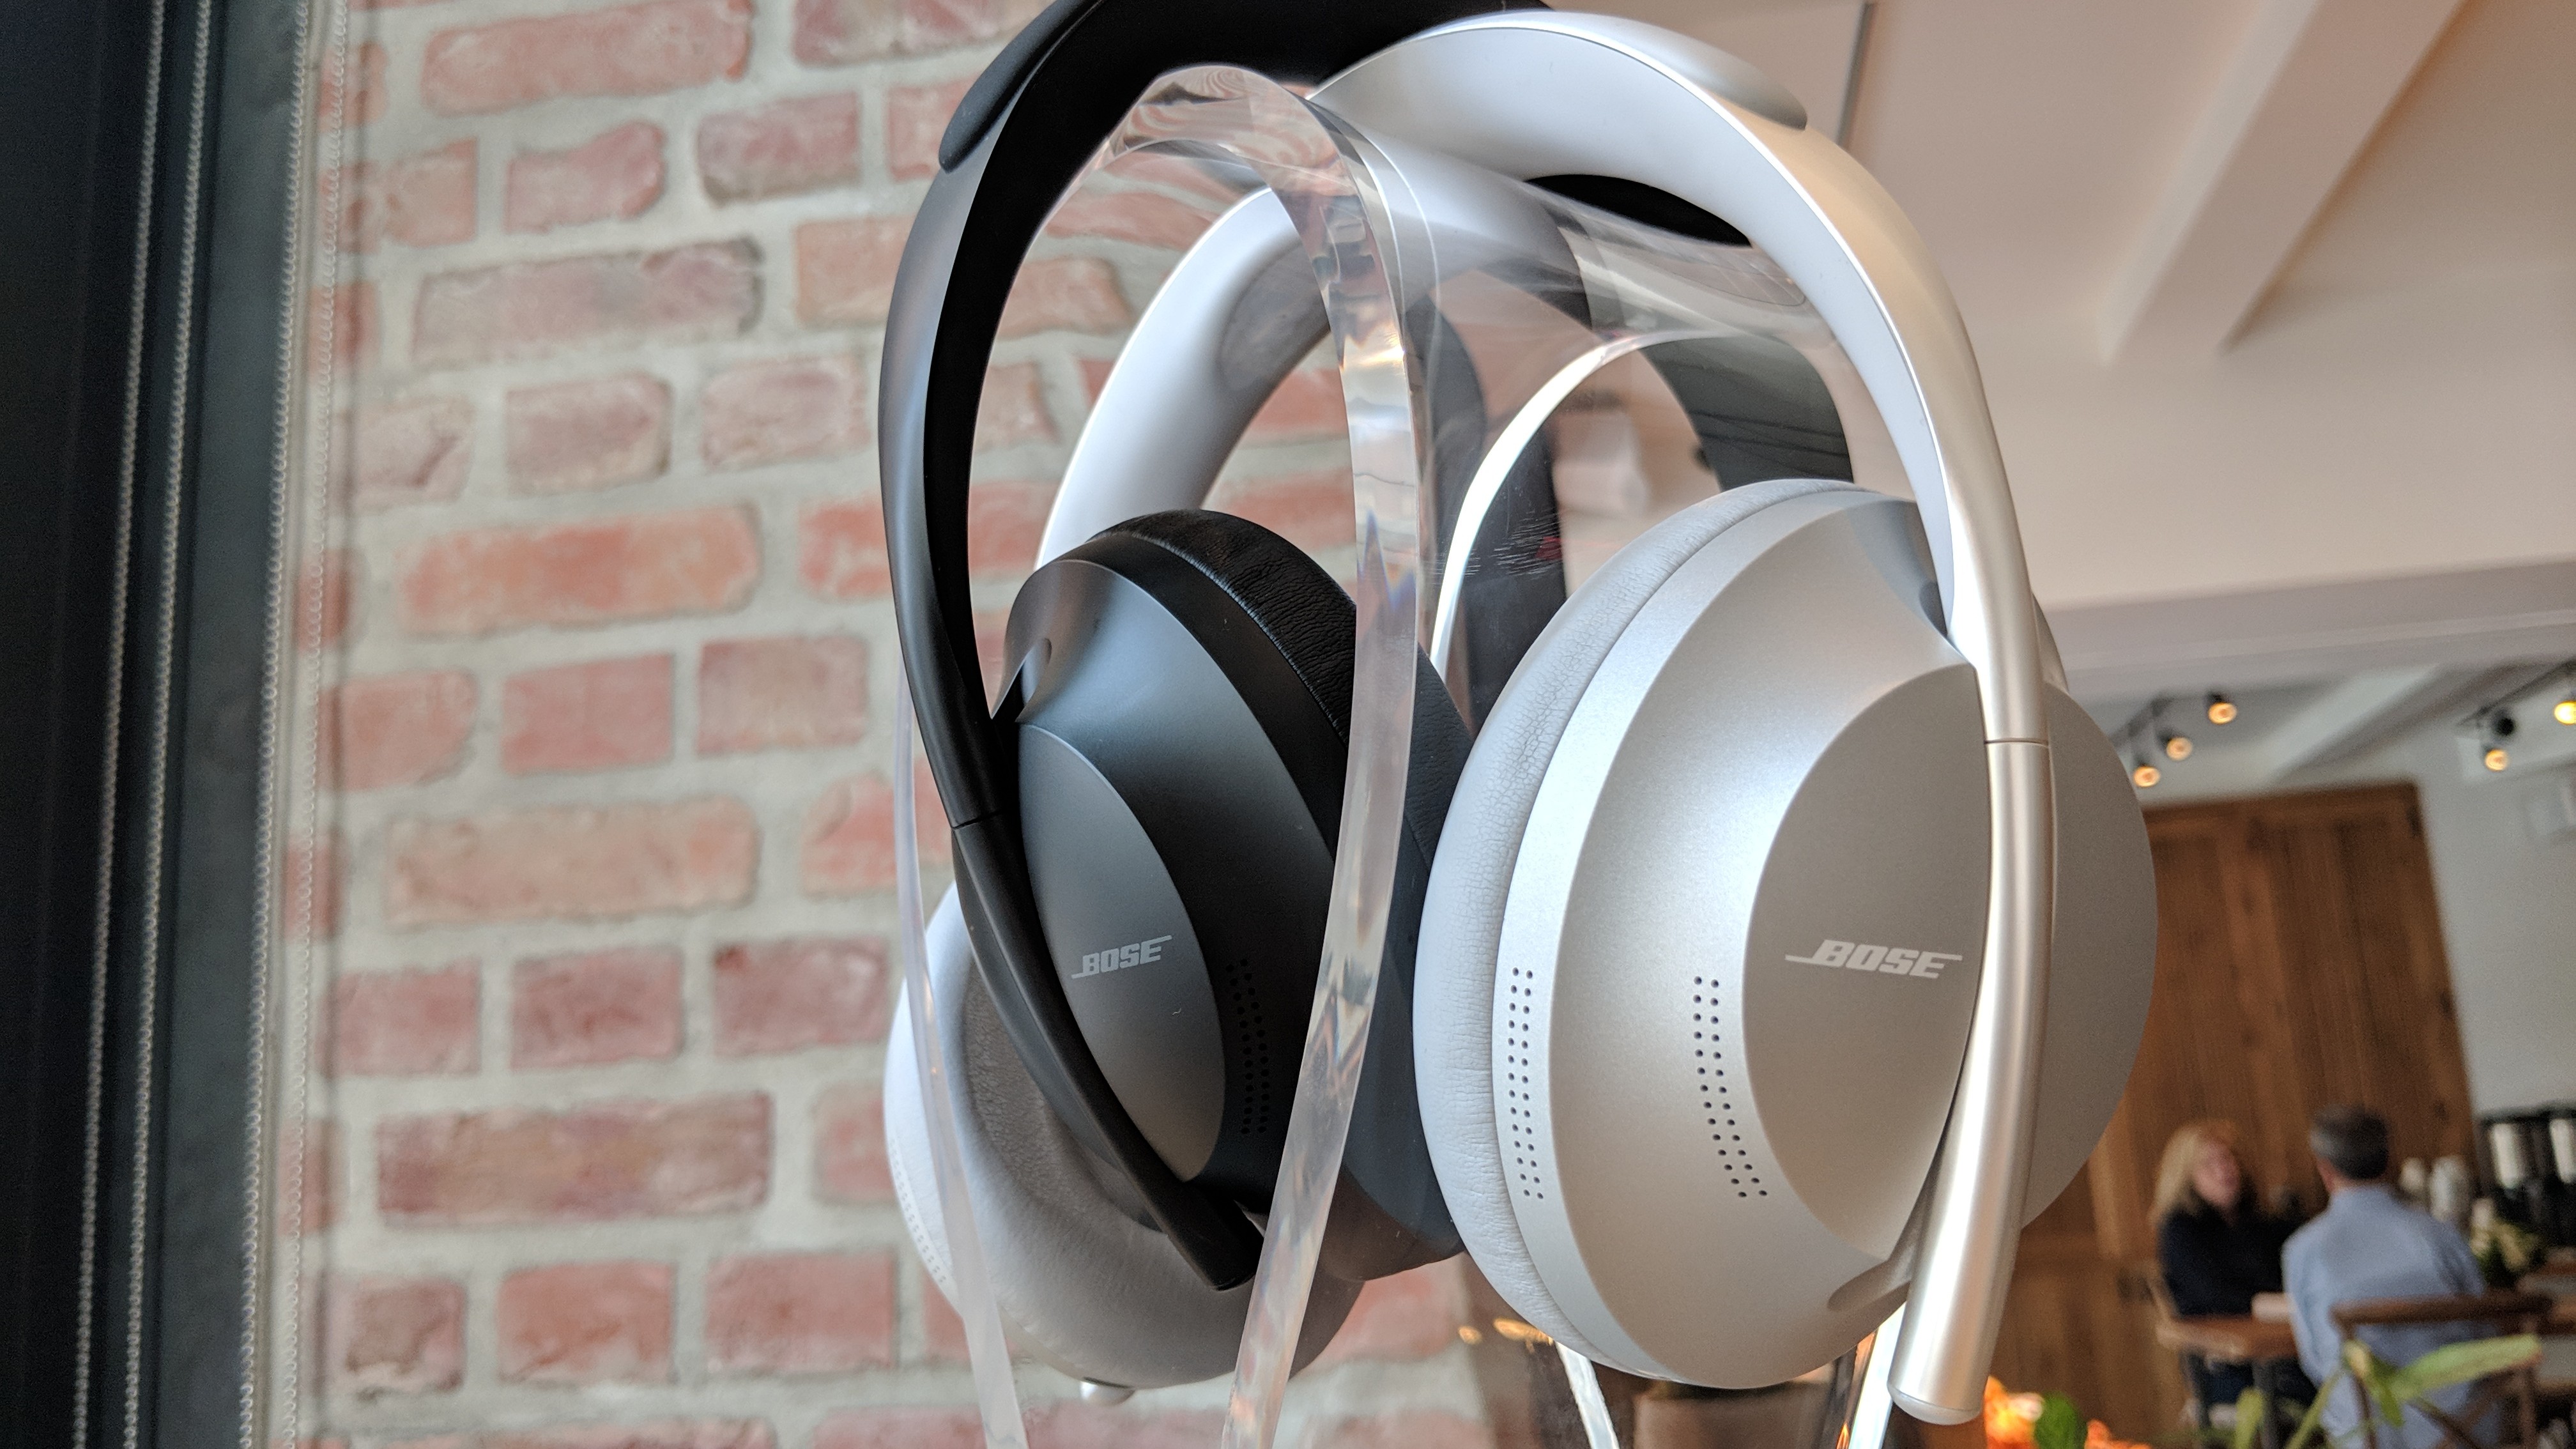 Bose 15 Xxx Hd - Best Bose headphones and earbuds in 2022 | Laptop Mag